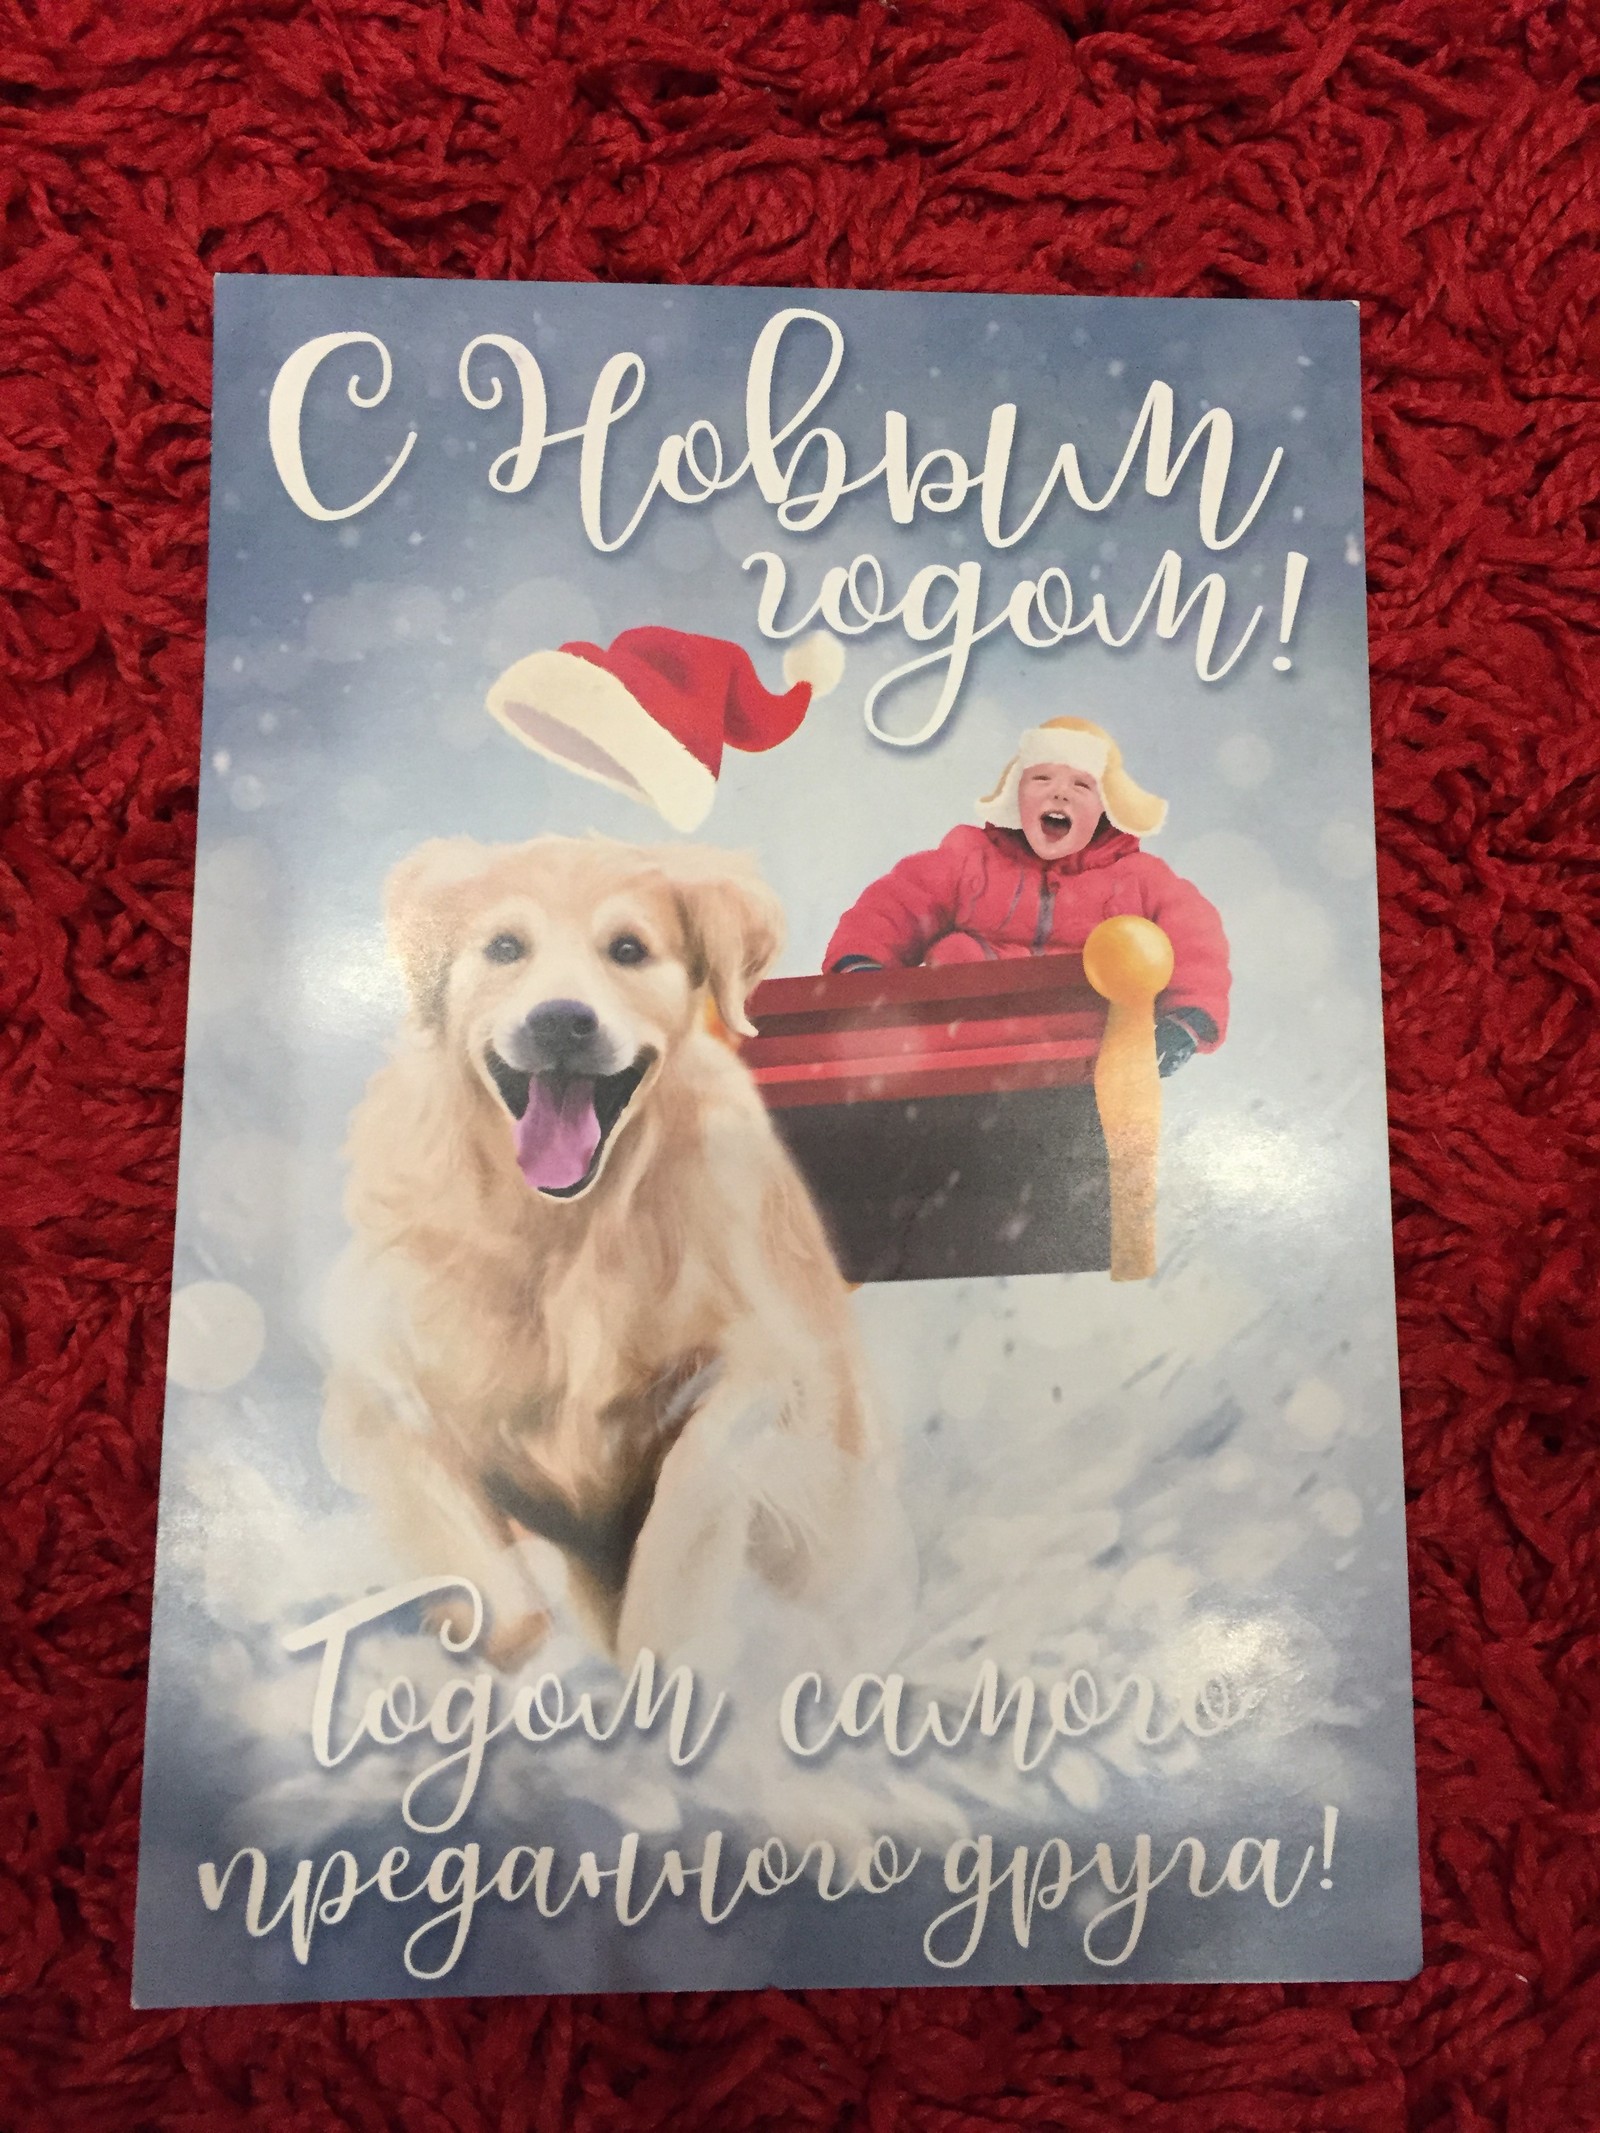 From Rostov-on-Don to Minsk - My, Gift exchange, First post, , New Year, Secret Santa, Longpost